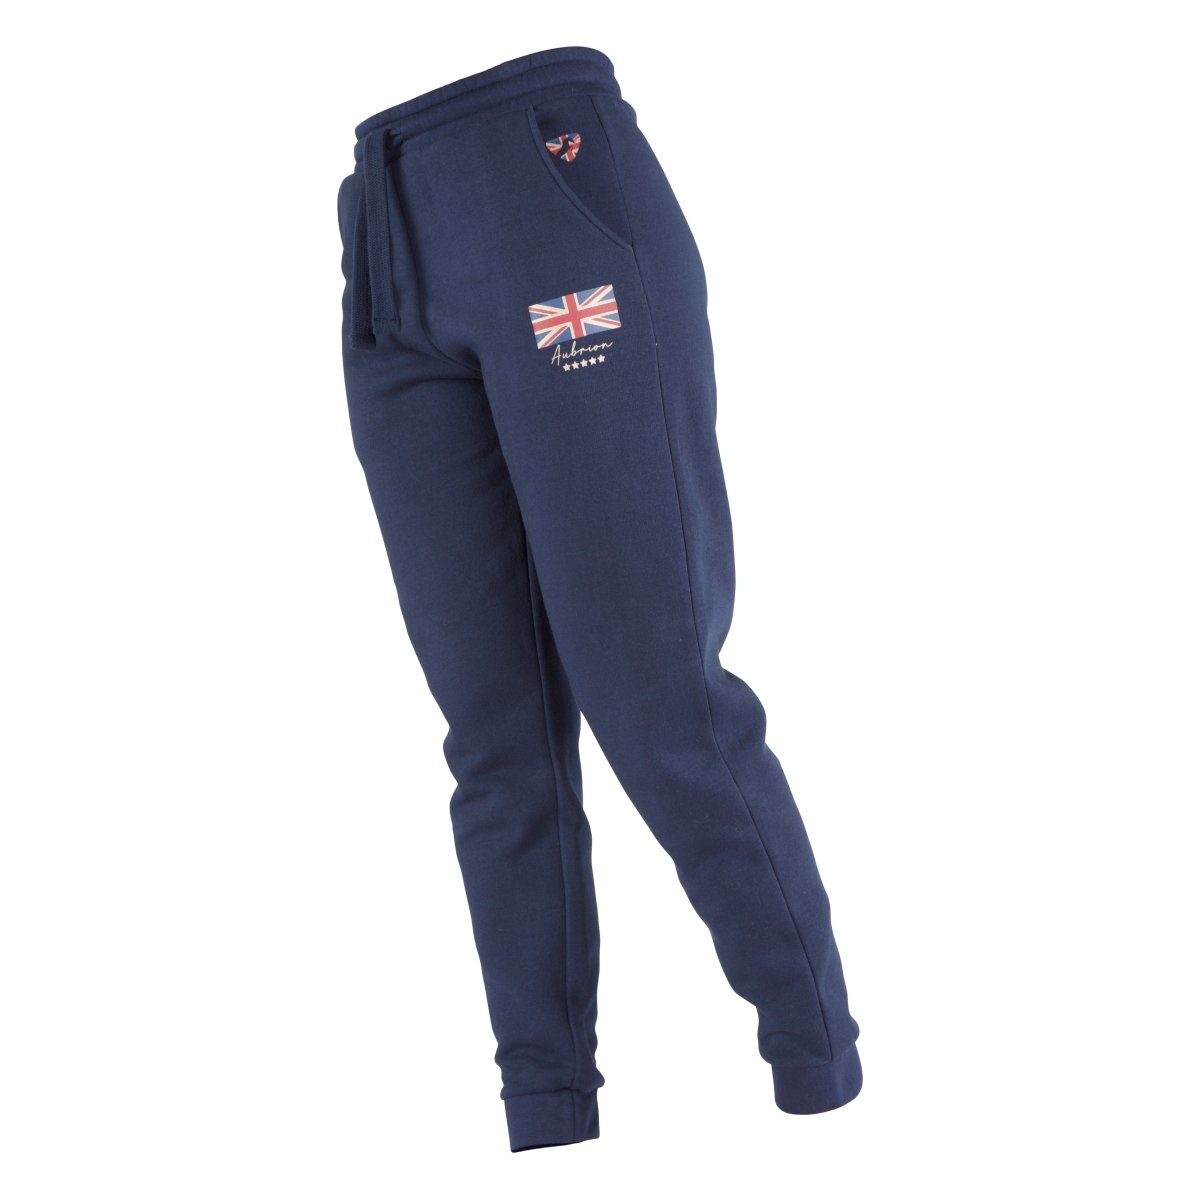 Aubrion Team Joggers - Young Rider - Navy Blue - 11/12 Yrs